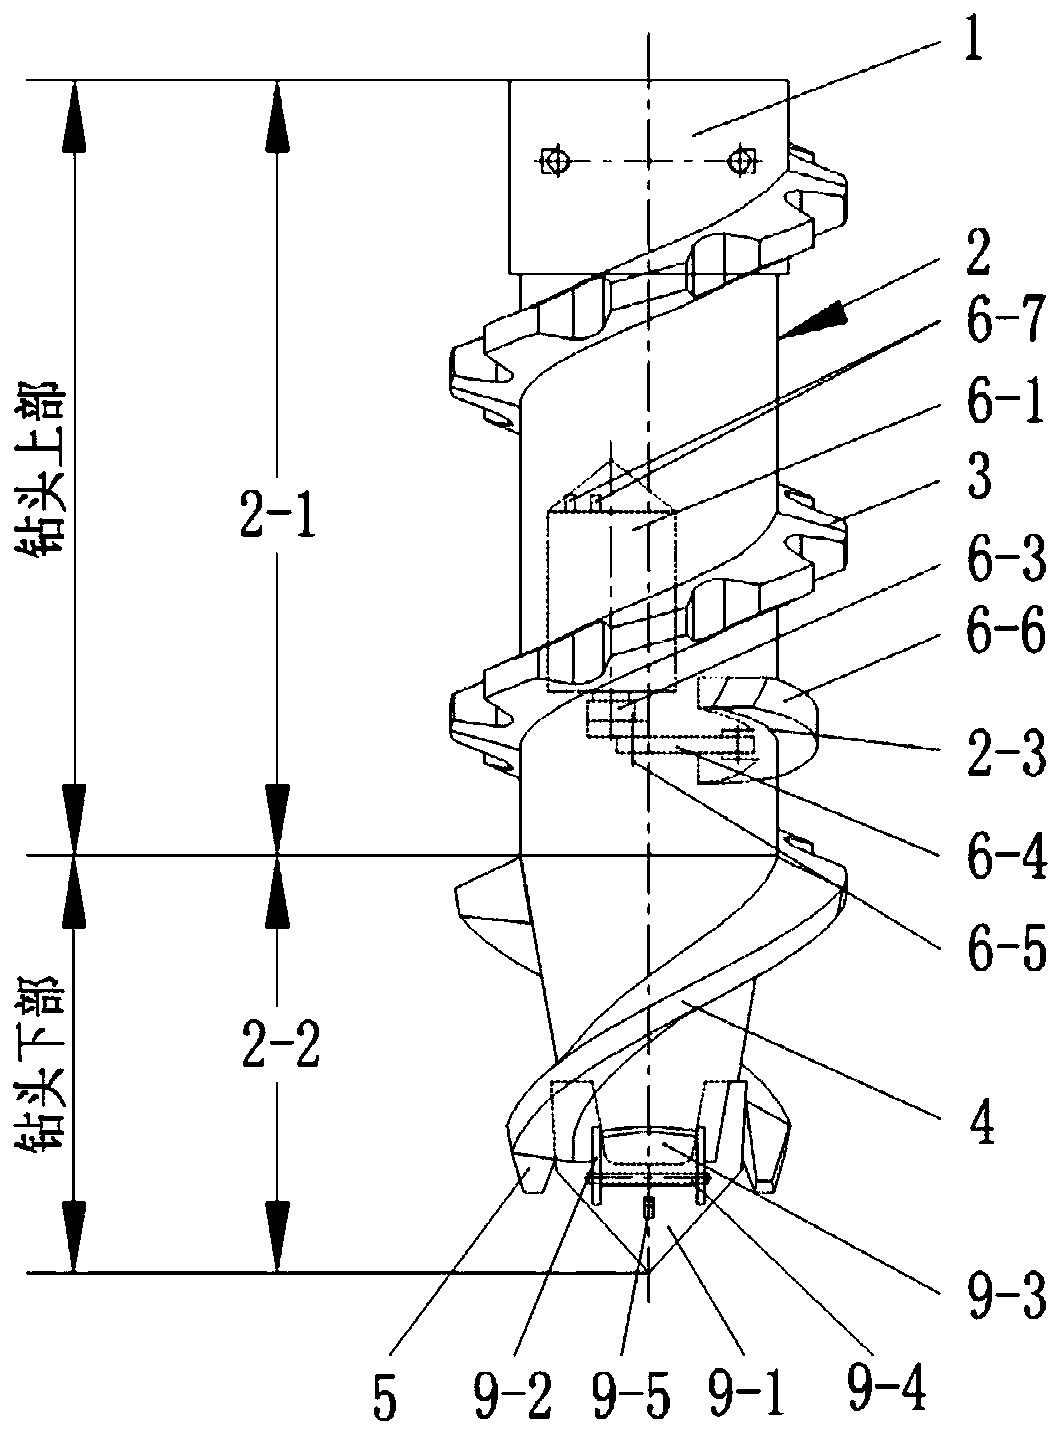 Spiral soil squeezing recompaction cast-in-place concrete pile, pile forming drill bit and construction method